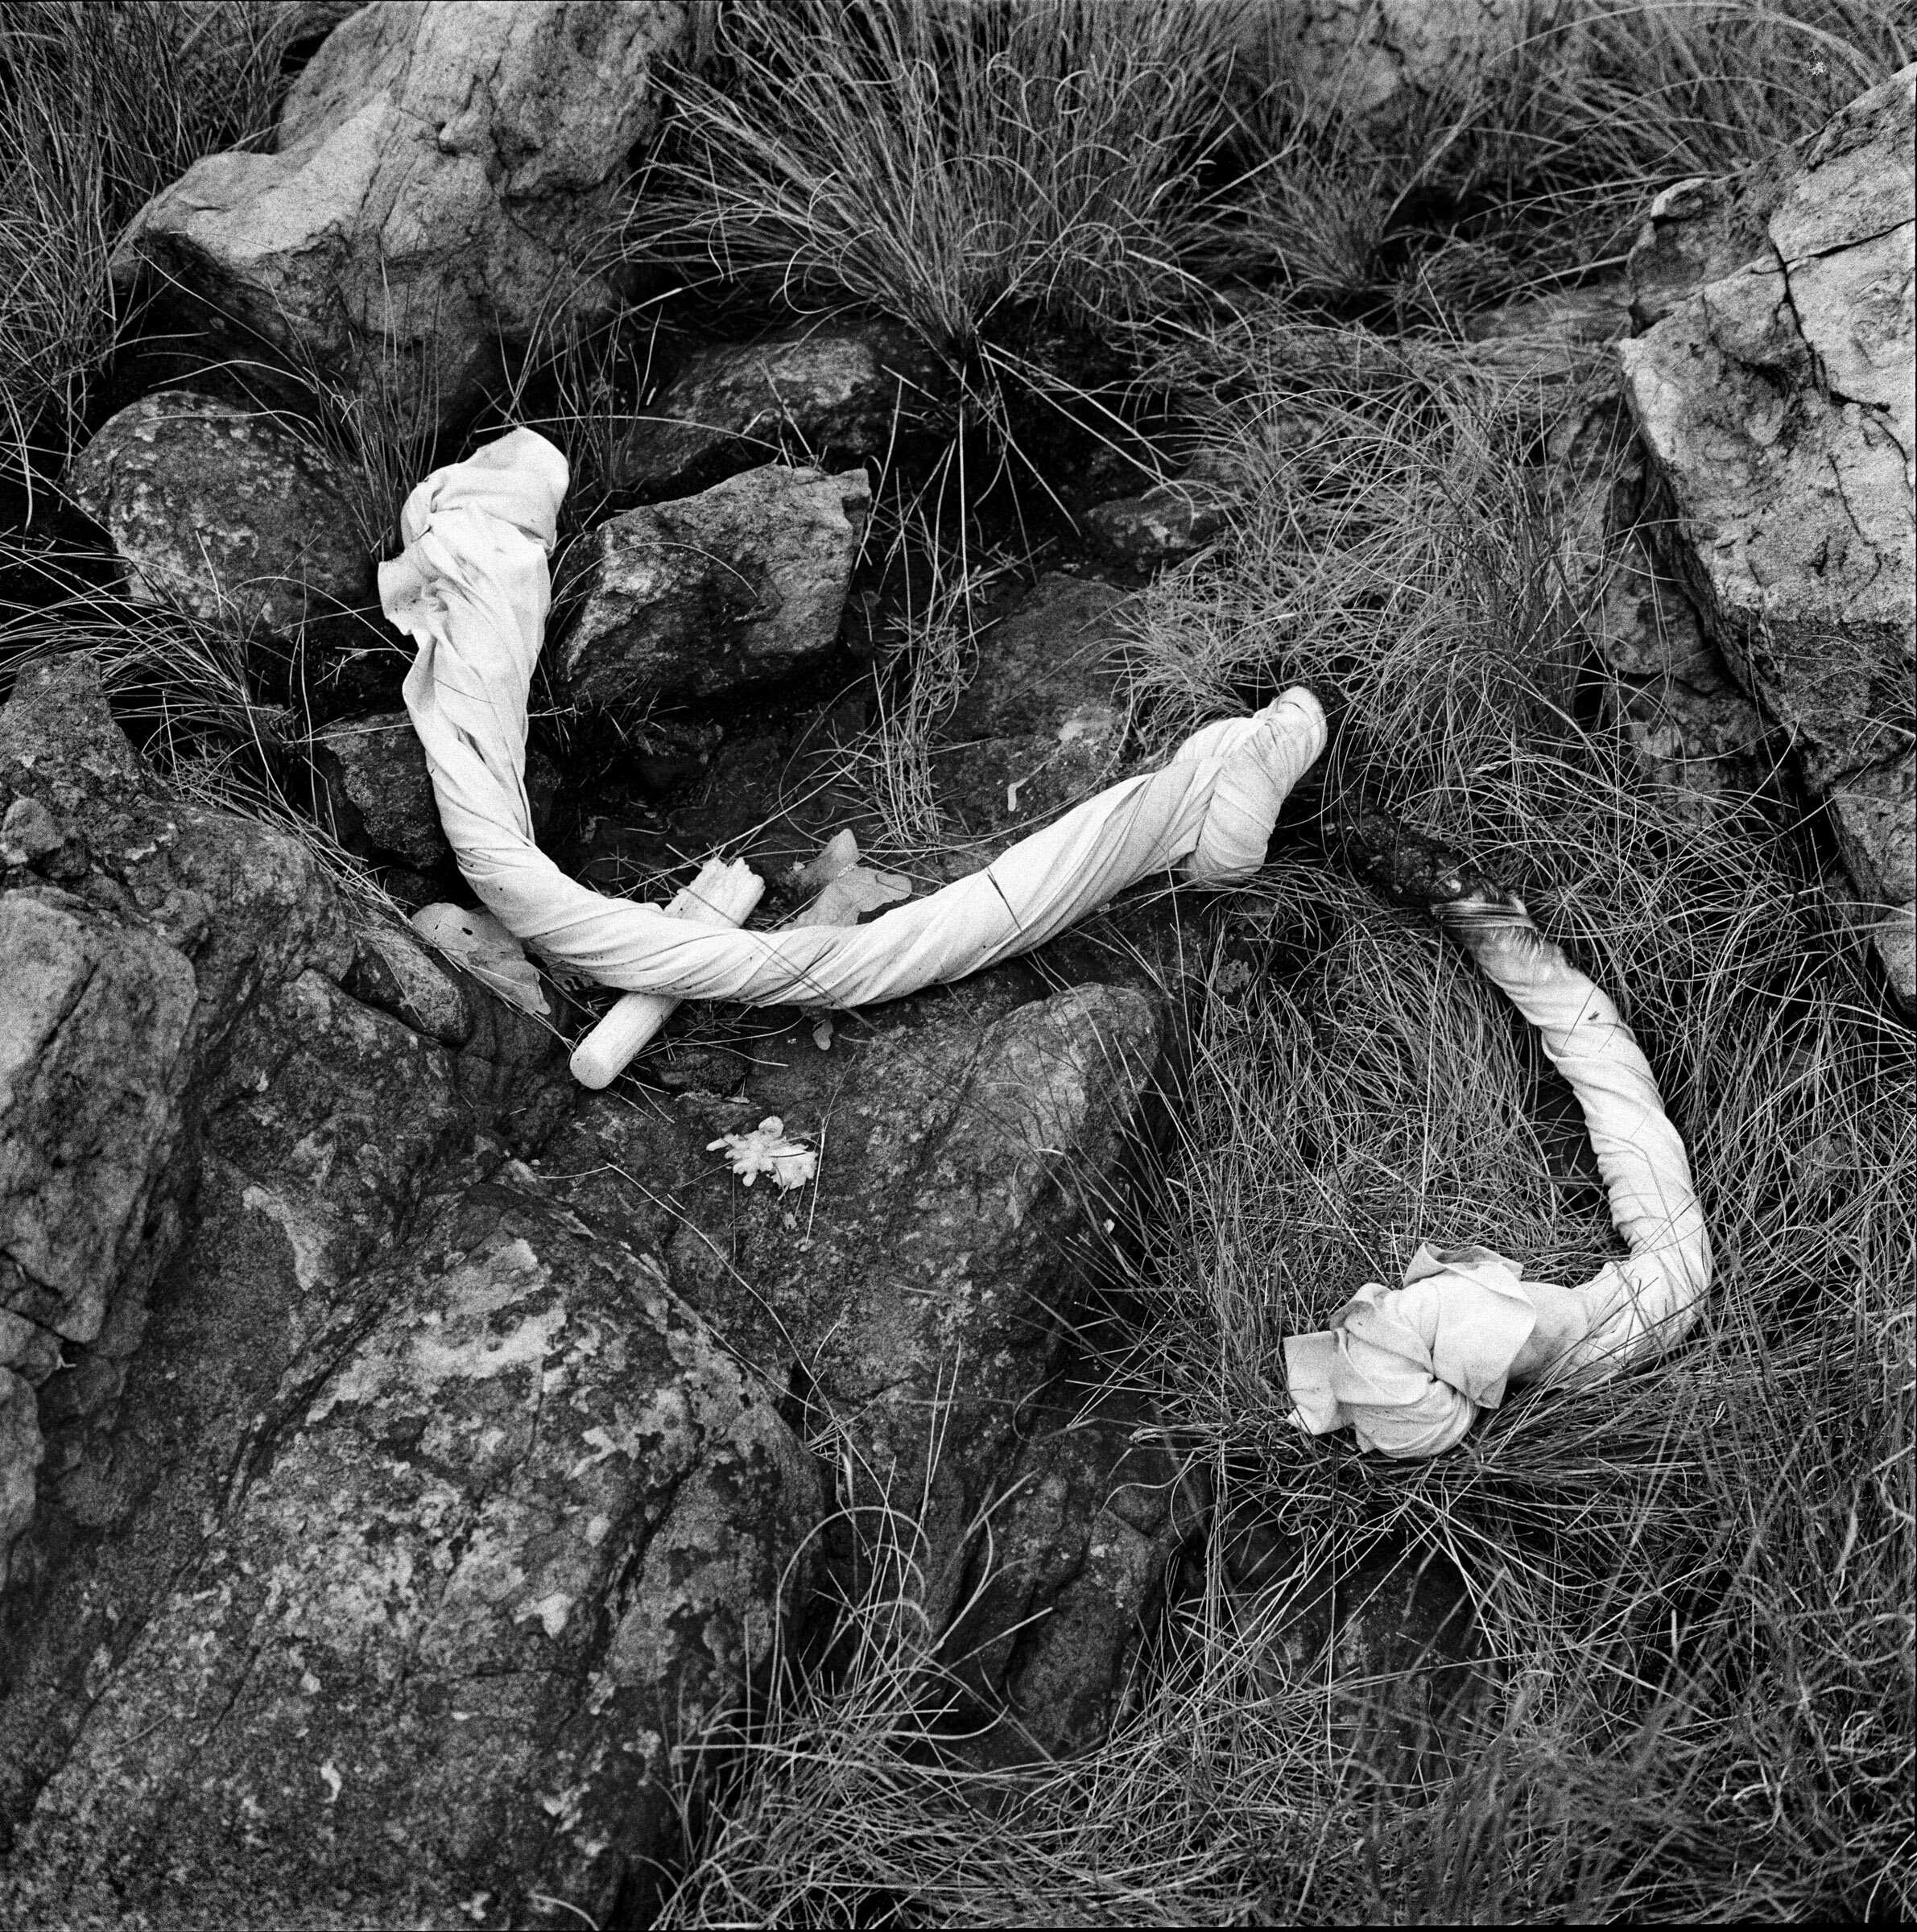  A candle and a twisted, knotted and charred cotton cloth remain on the high rocks of Melville Koppies in Johannesburg, South Africa., after a night ritual by members of a Zioni church sect, 2007.  photo Greg Marinovich 